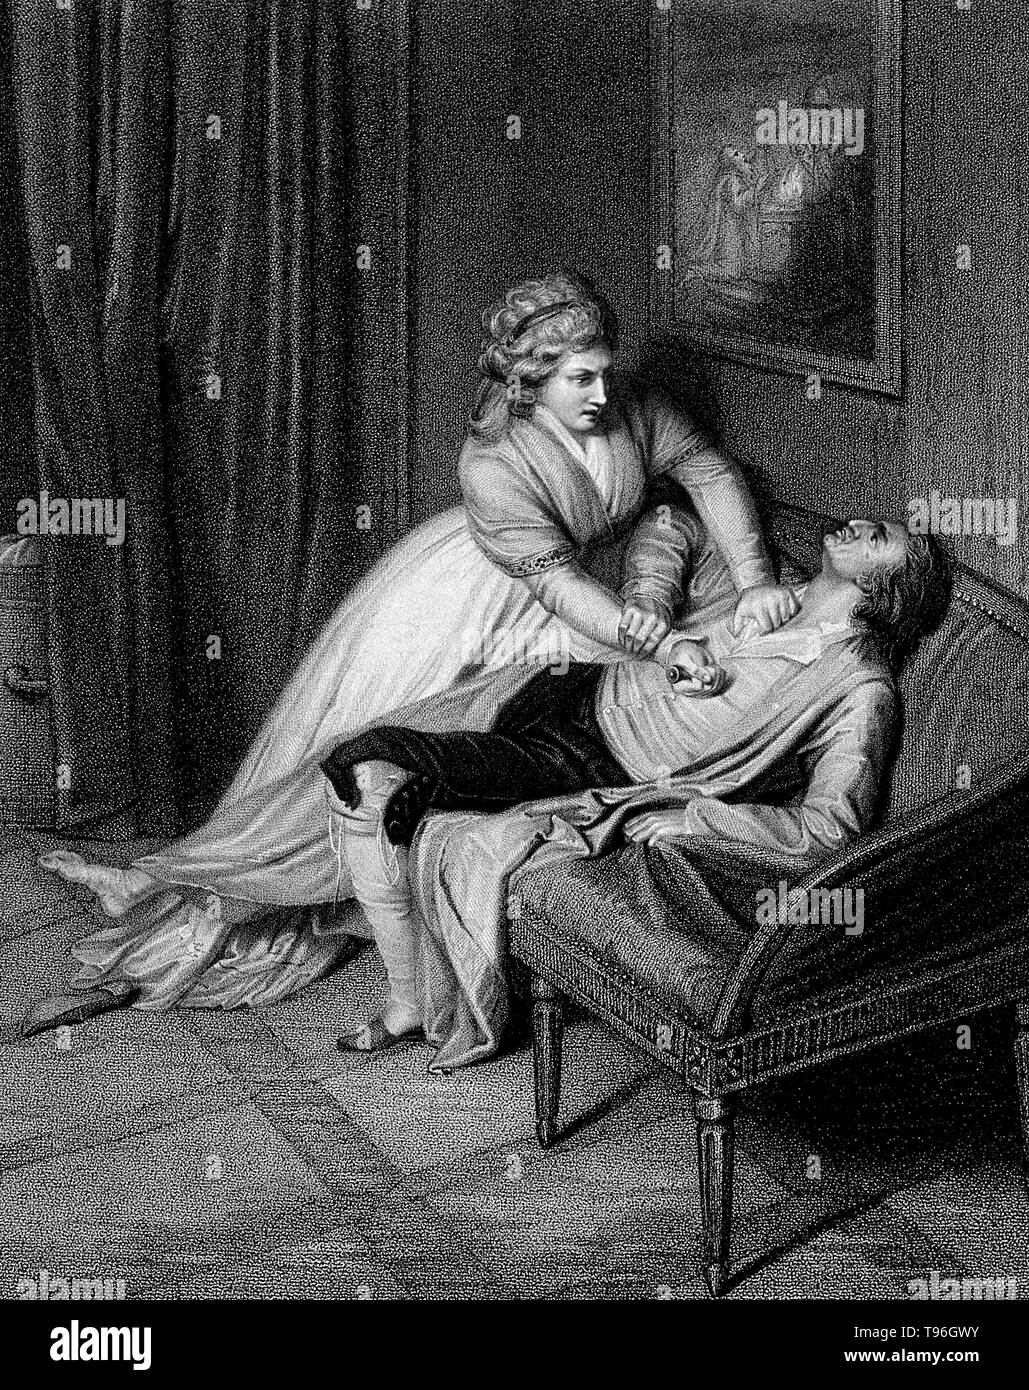 Charlotte Corday stabbing Marat on a settee. Charlotte Corday (July 27, 1768 - July 17, 1793) was a figure of the French Revolution. In 1793, she was guillotined for the assassination of Jacobin leader Jean-Paul Marat. She believed that Marat was threatening the Republic, and that his death would end violence throughout the nation. She went to Marat's home on the evening of July 13th, claiming to have knowledge of a planned Girondist uprising in Caen. Marat admitted her. Stock Photo